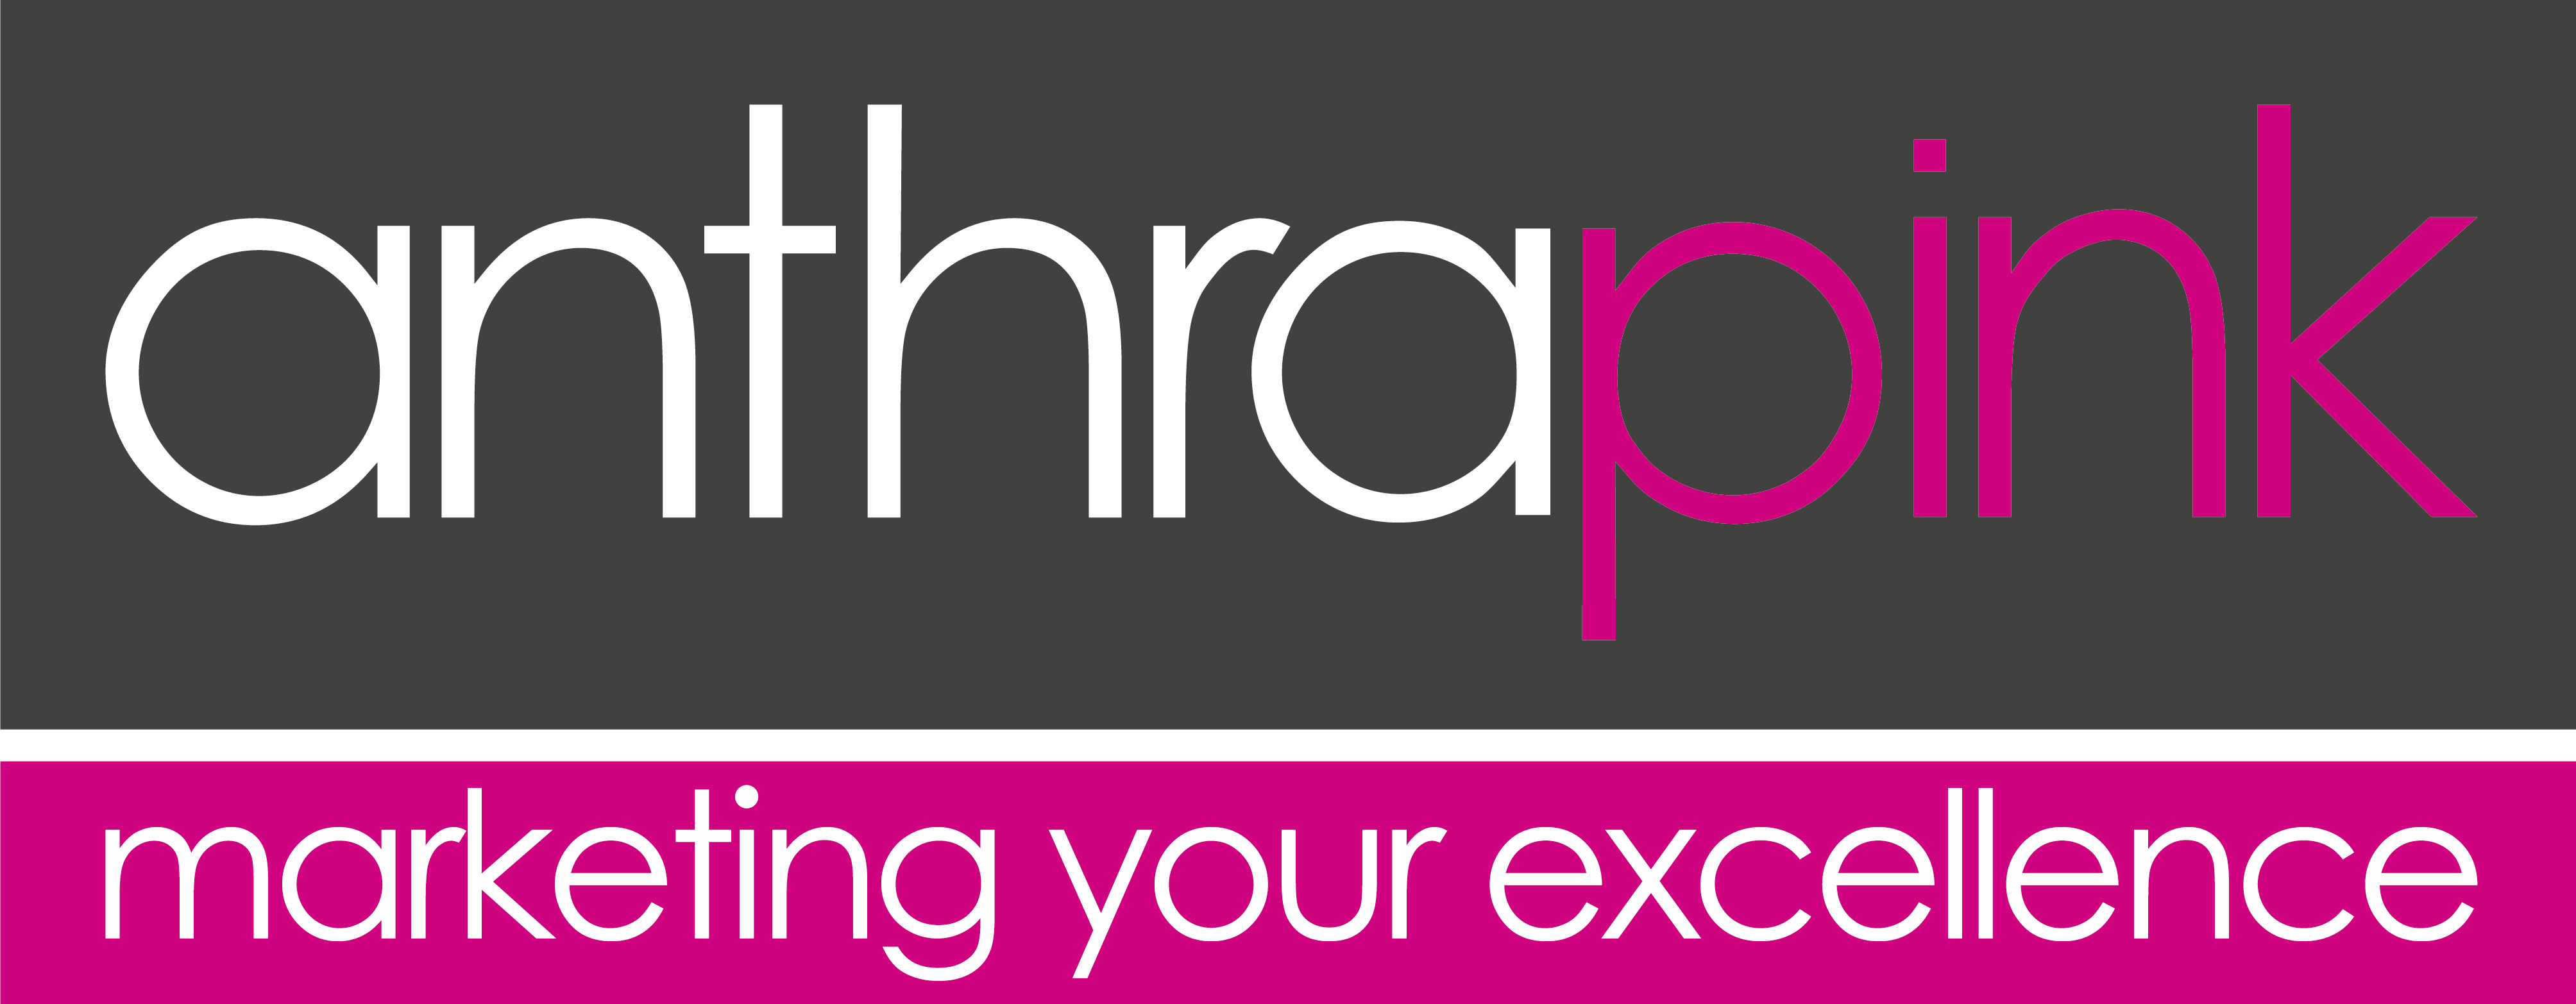 anthrapink marketing your excellence